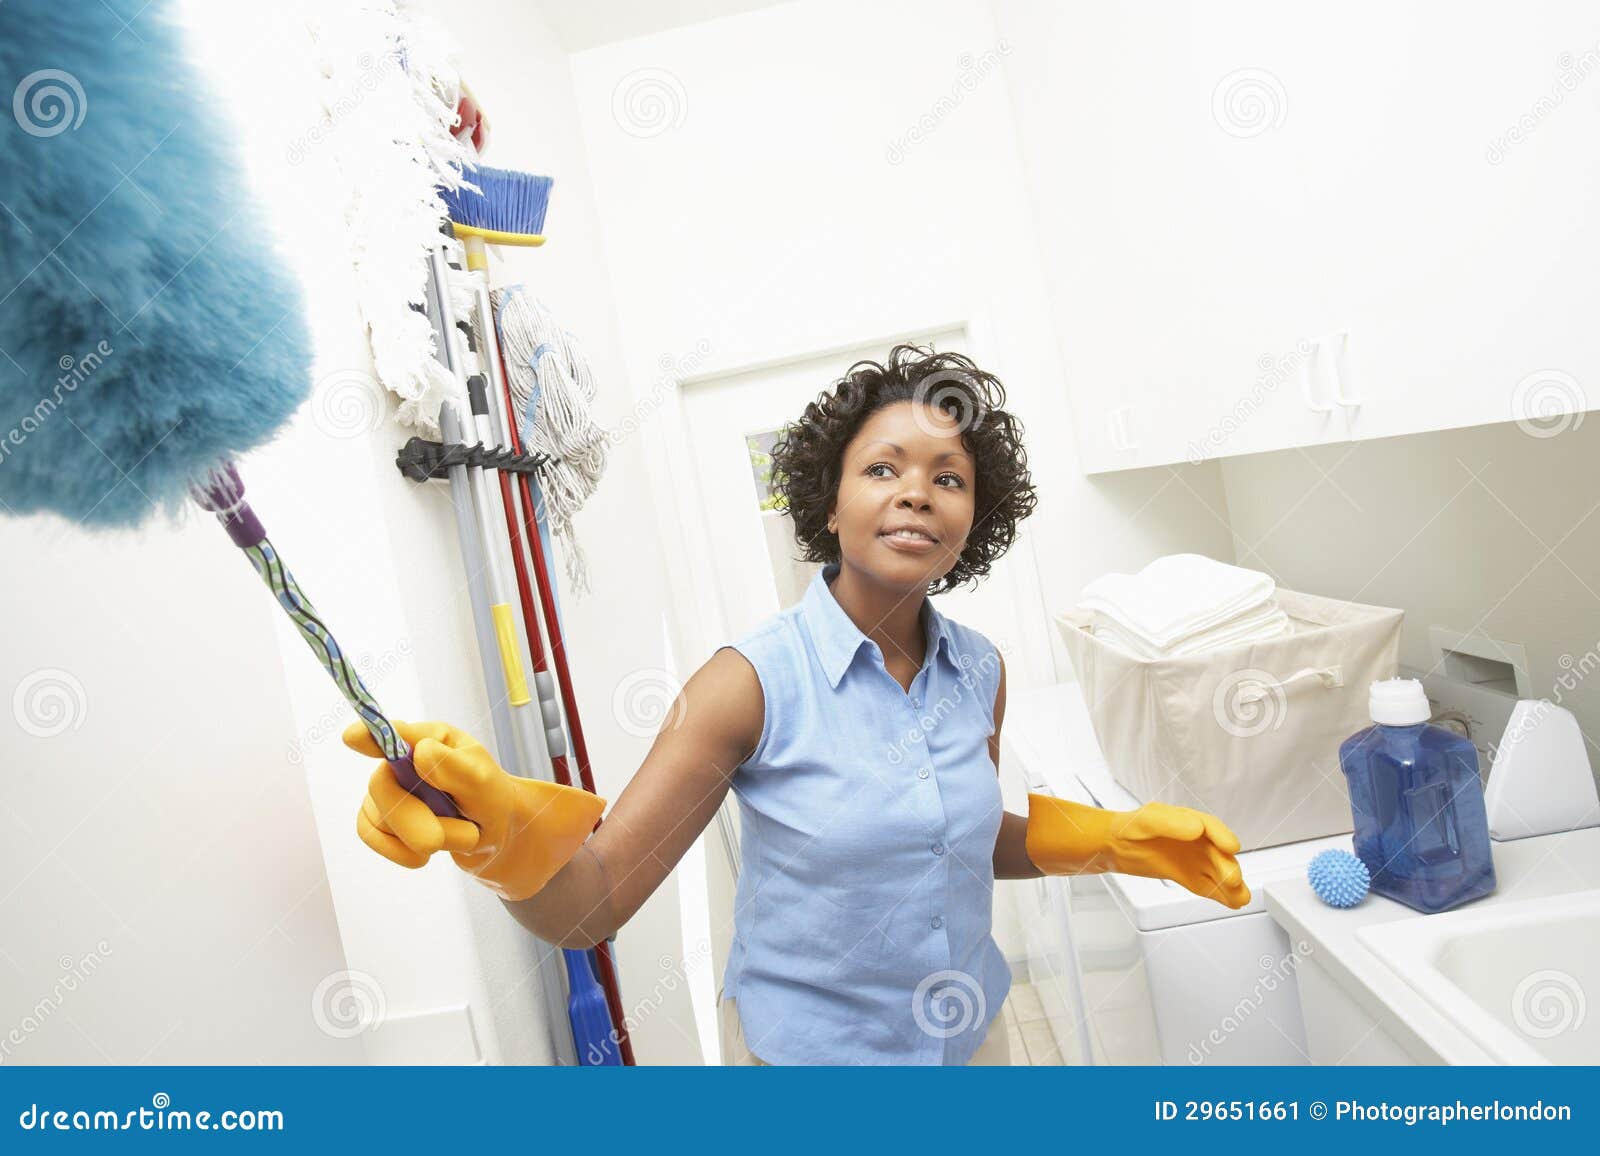 8,822 Black Woman Cleaning House Royalty-Free Images, Stock Photos